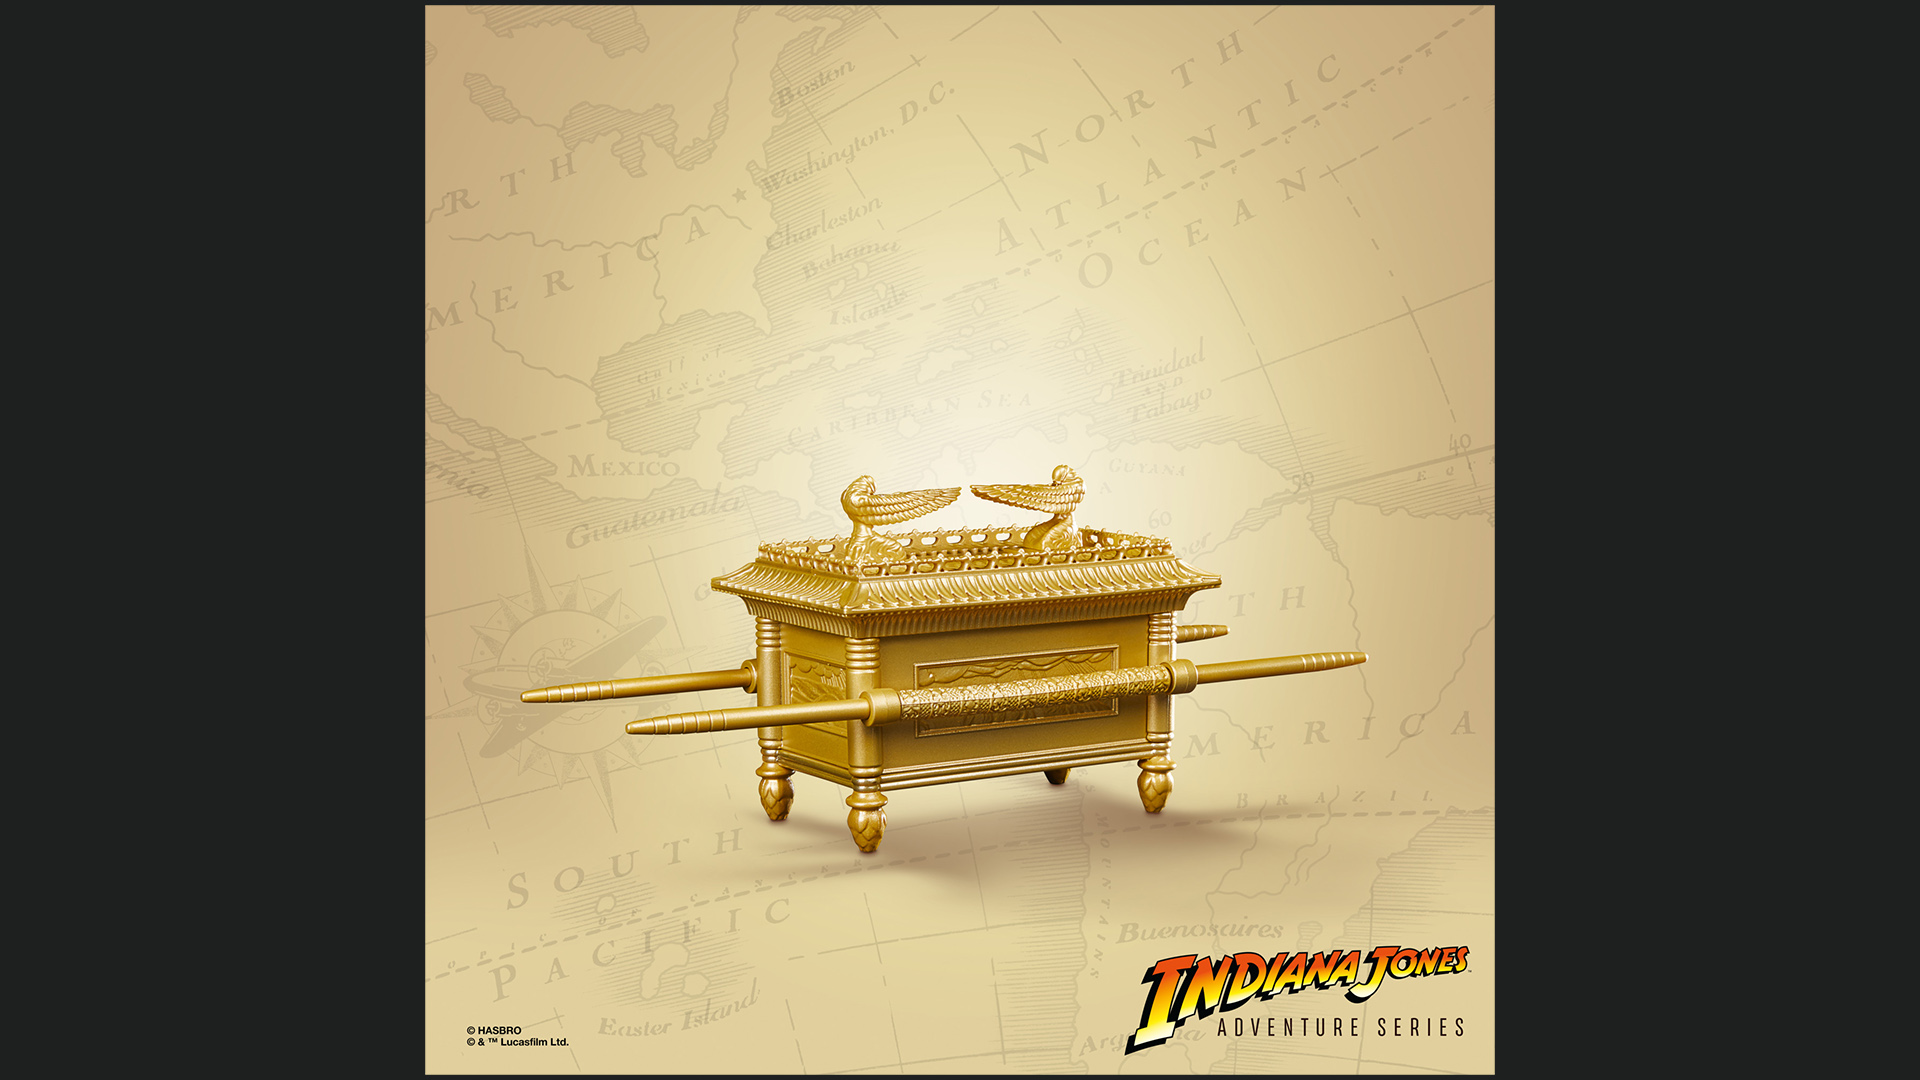 The Ark of the Covenant and Indiana Jones Action Figures